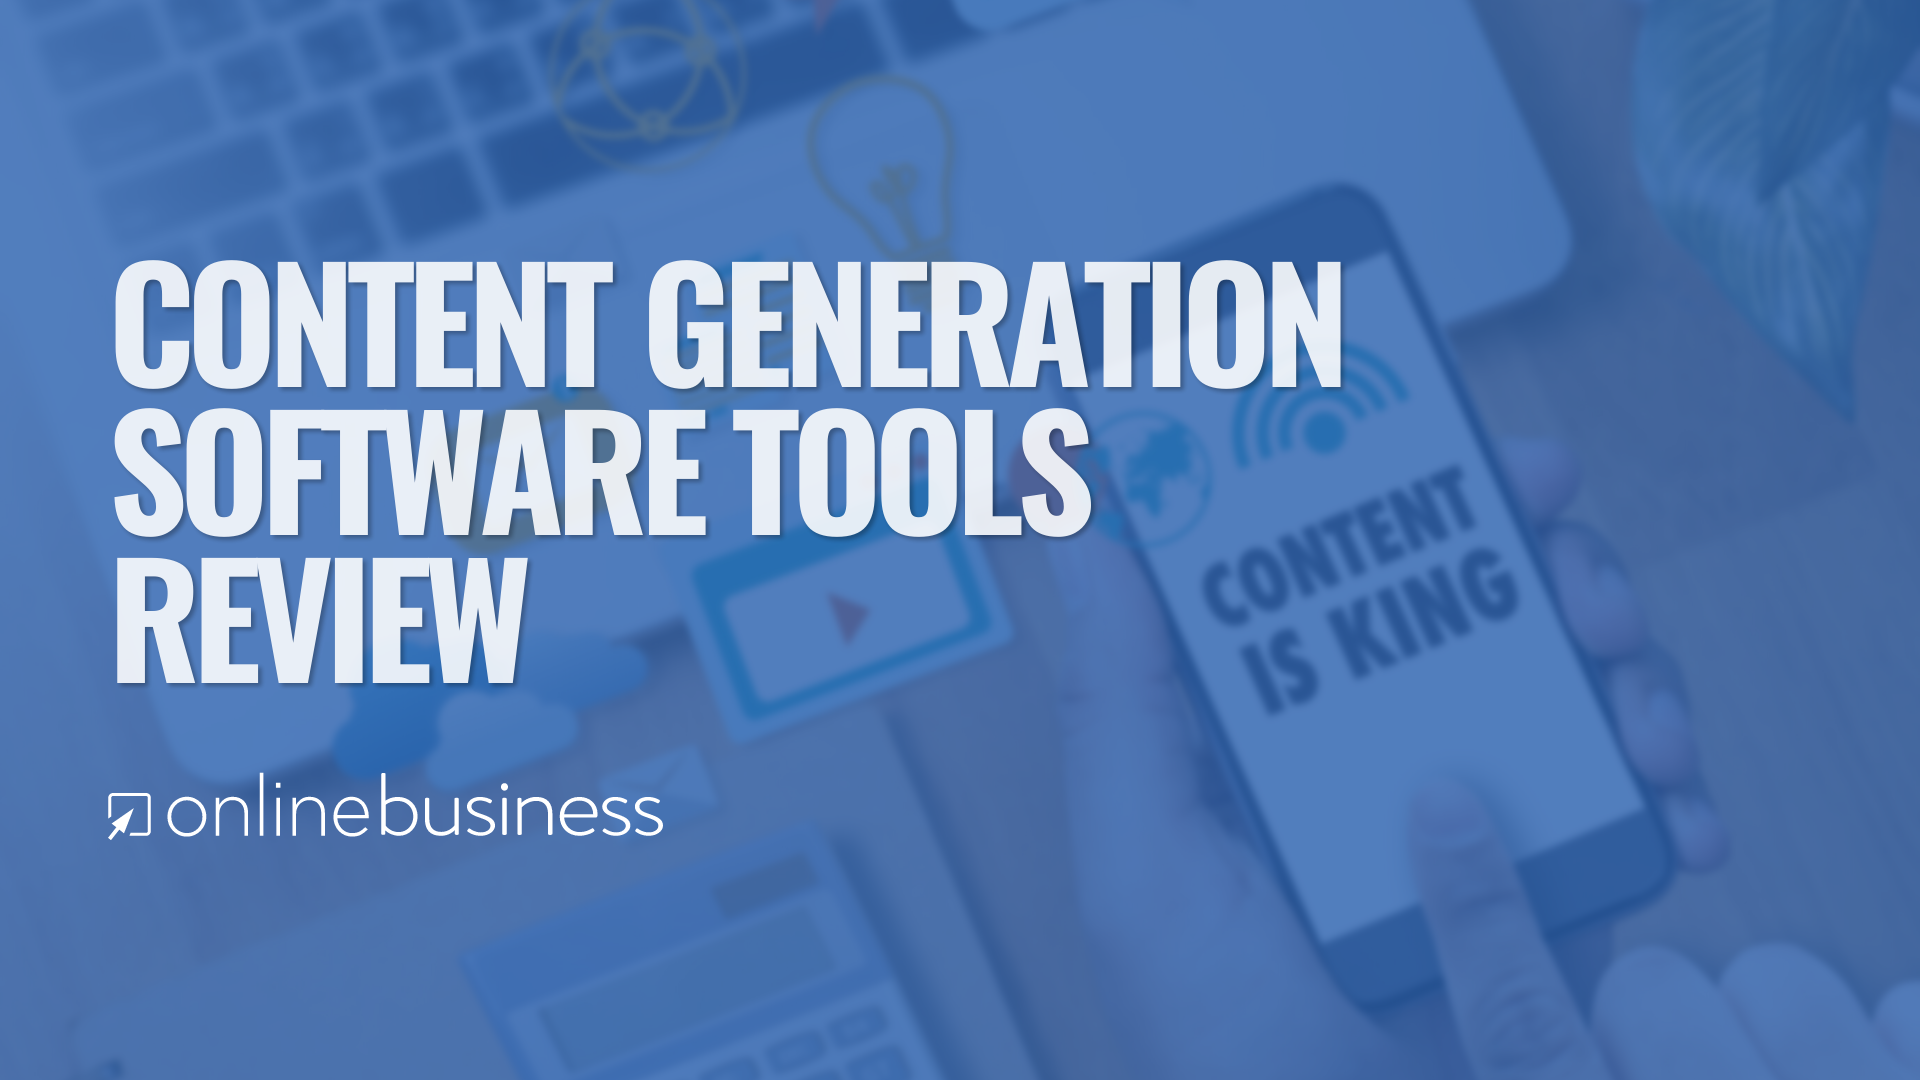 OnlineBusiness.com Reviews Various Content Generation Software Tools